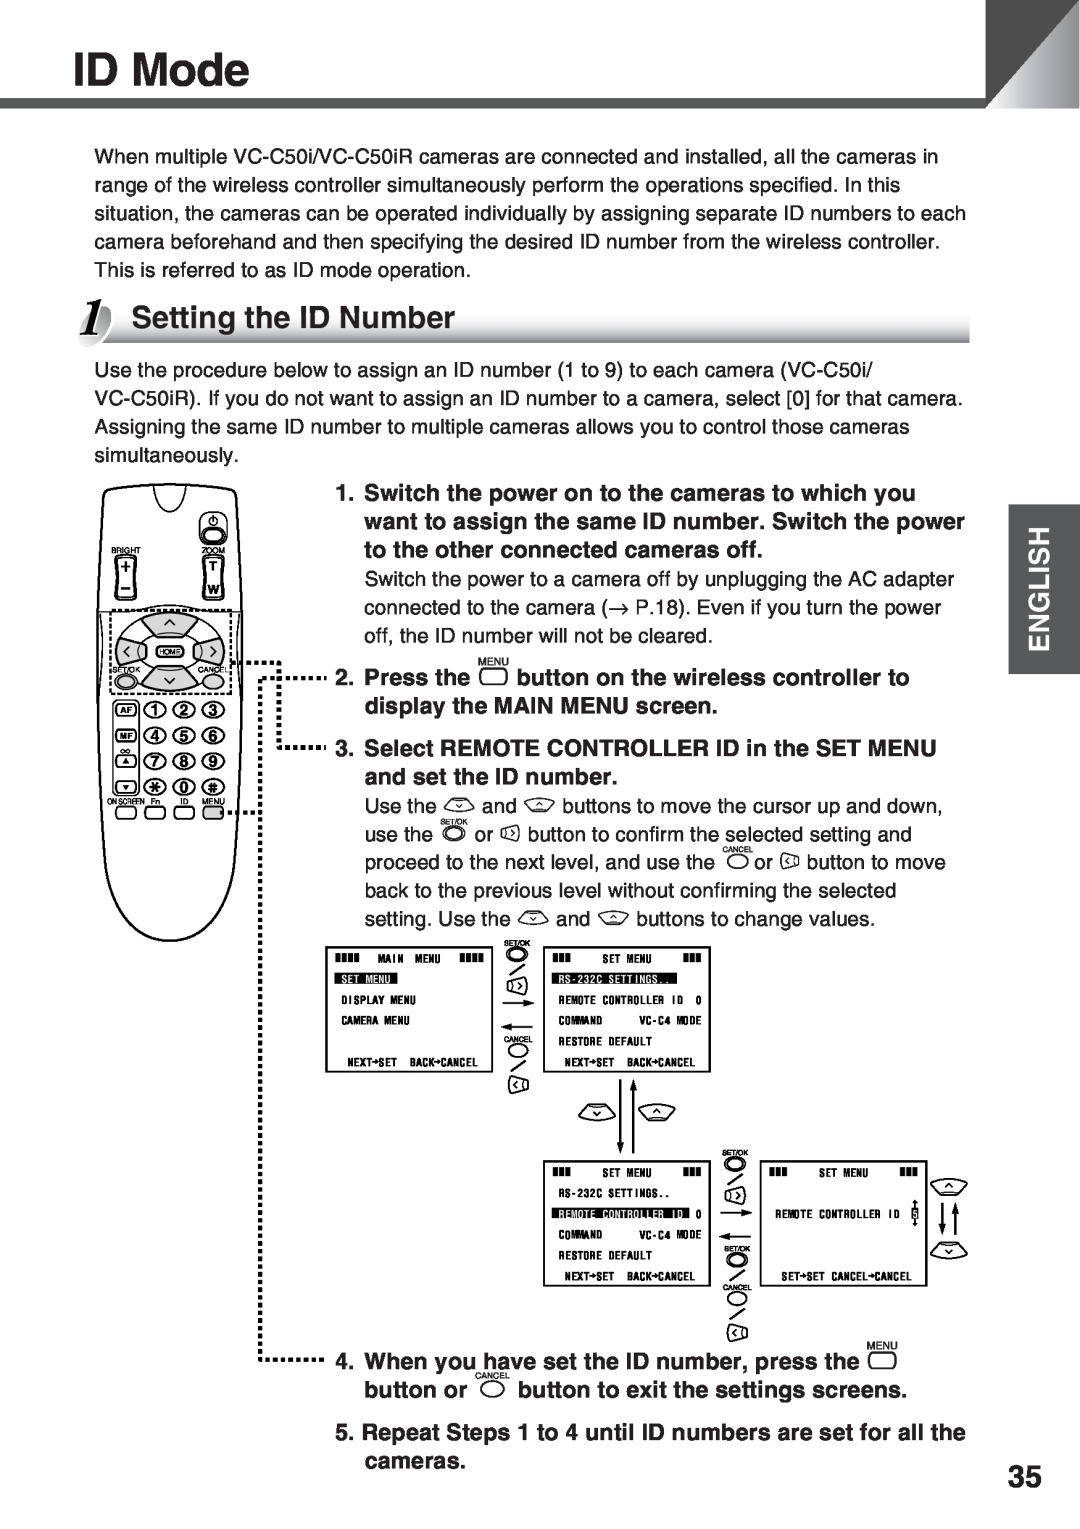 Canon VC-C50i, VC-C50IR instruction manual ID Mode, Setting the ID Number, English 